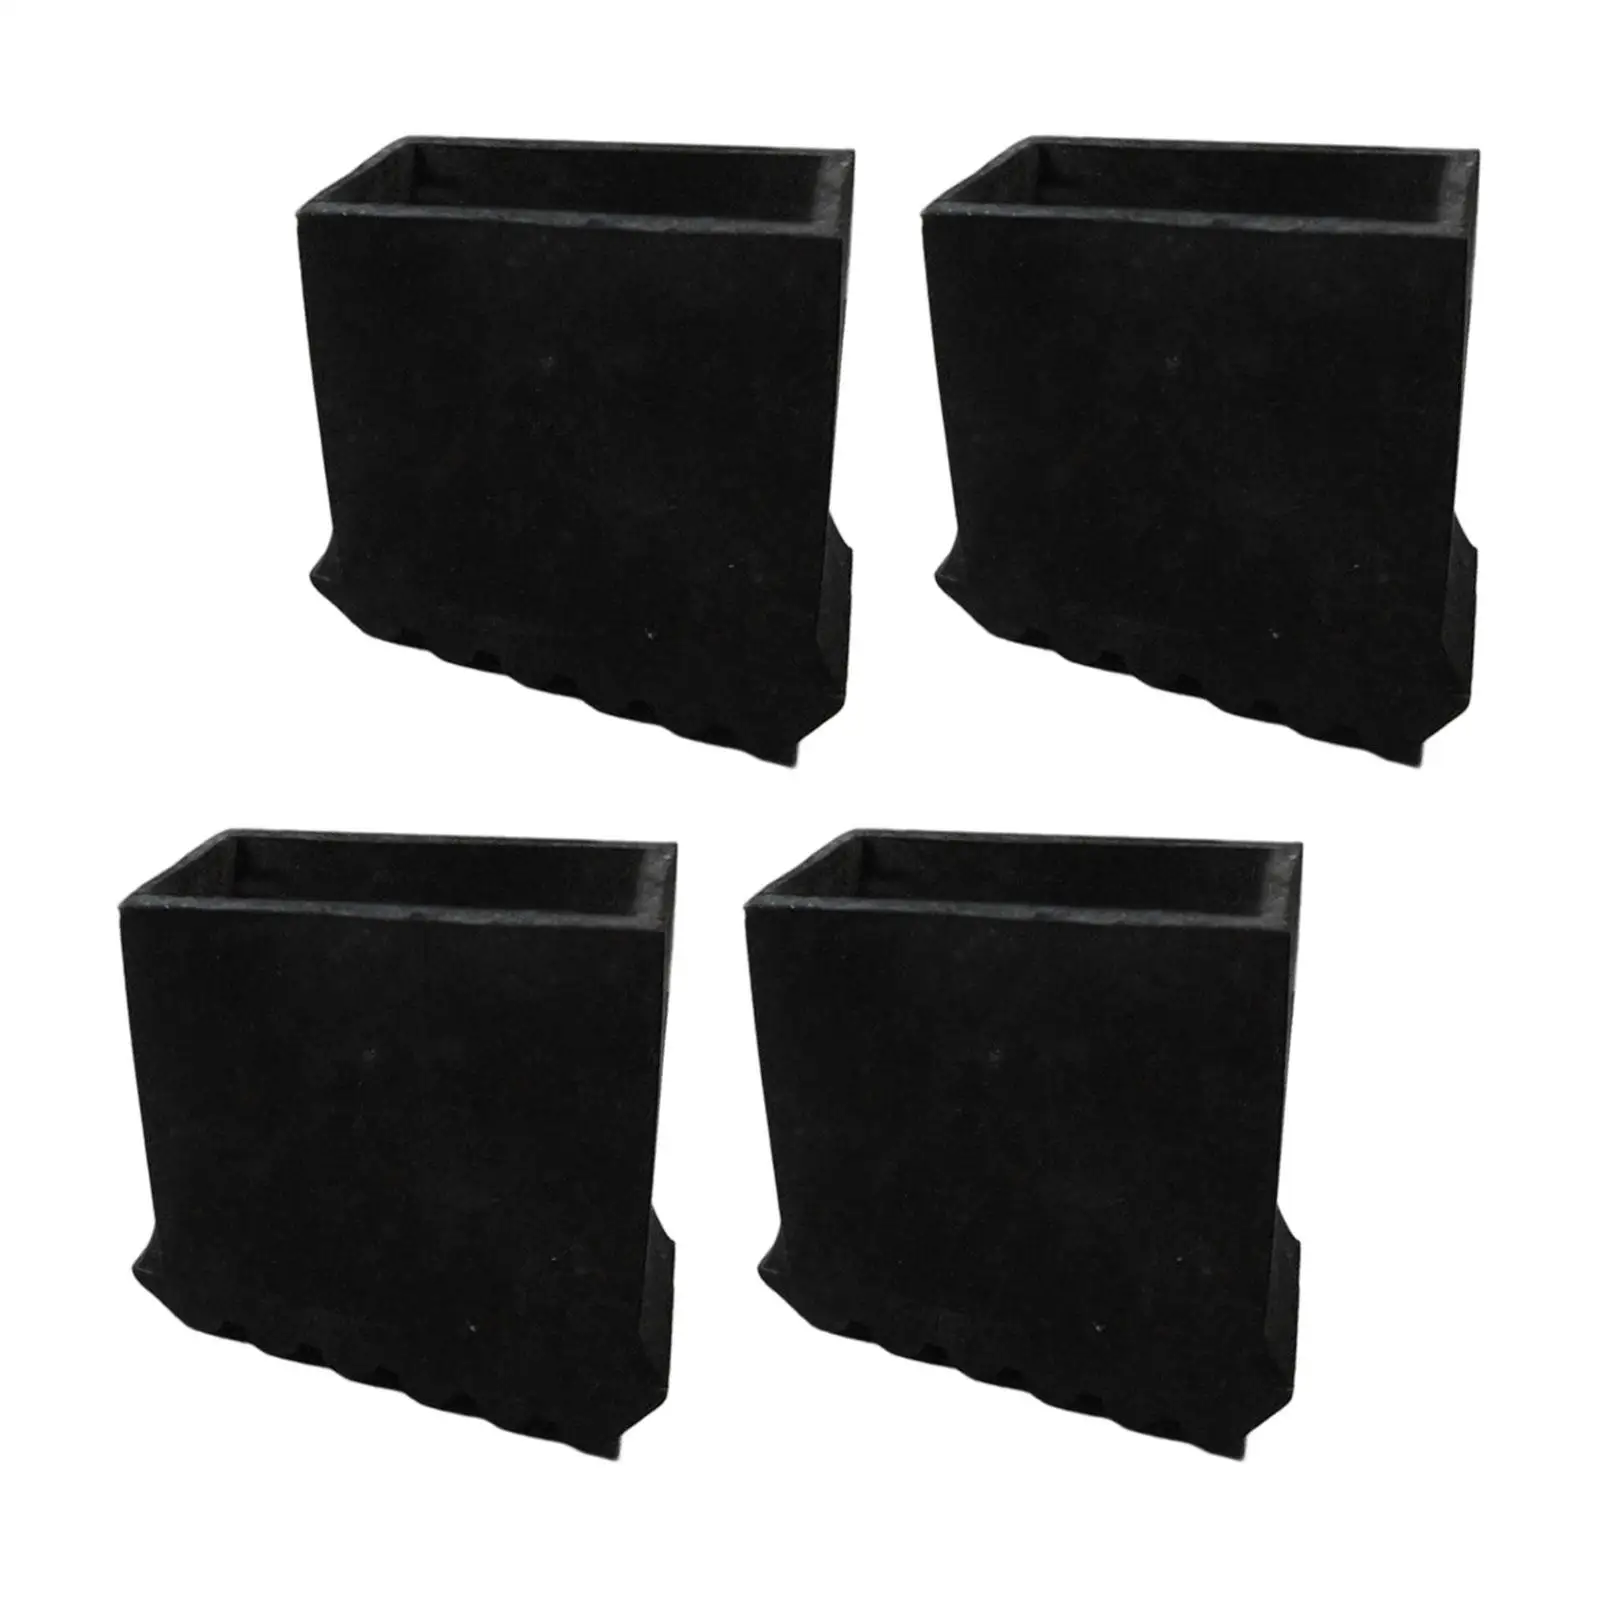 4Pcs Ladder Non Slip Feet Mats Protects Your Floor Easy to Install Durable Convenient Cushion Telescoping Ladder Cap Feet Covers